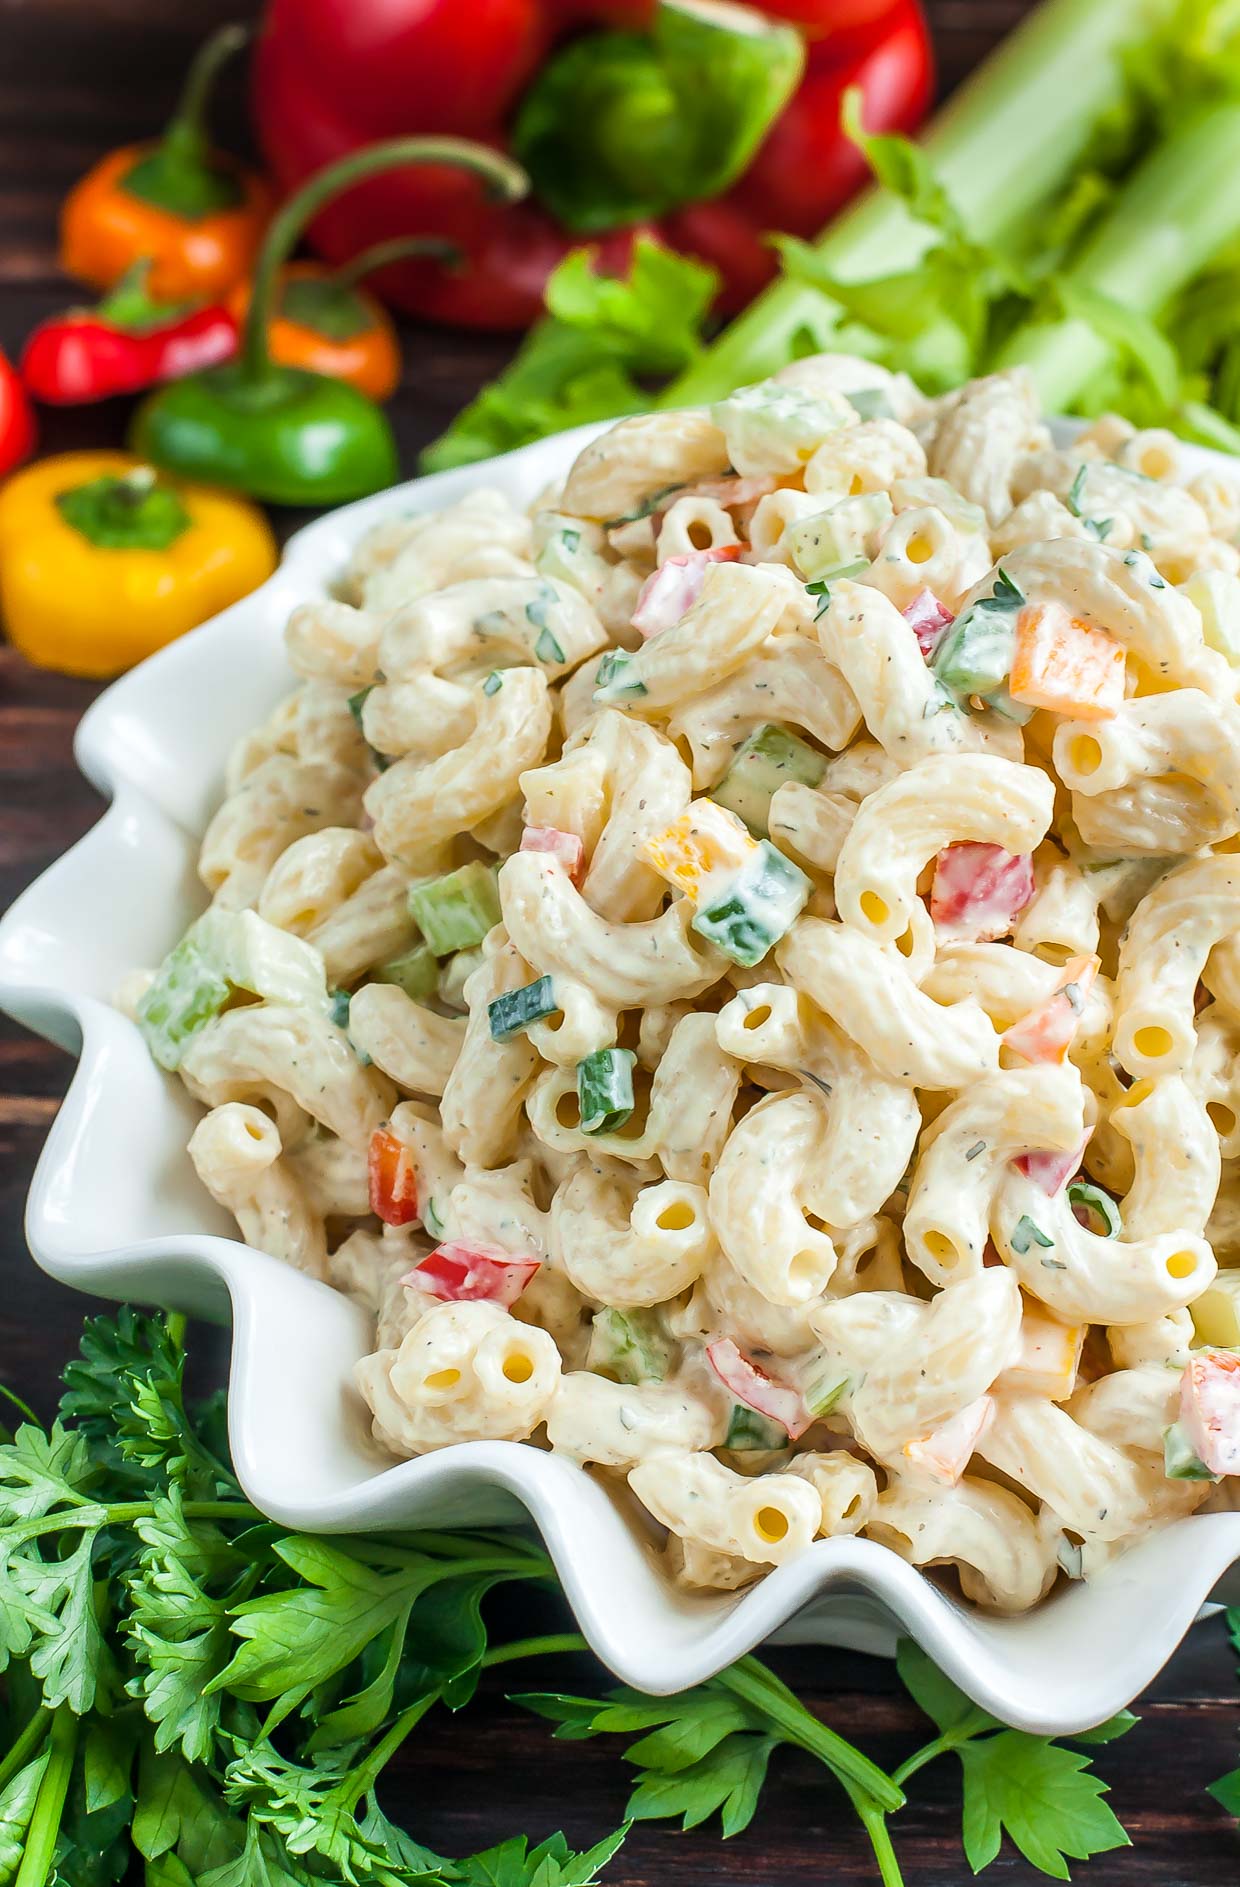 This quick and easy homestyle macaroni salad is the perfect side dish for your Spring picnics and Summer barbecues!